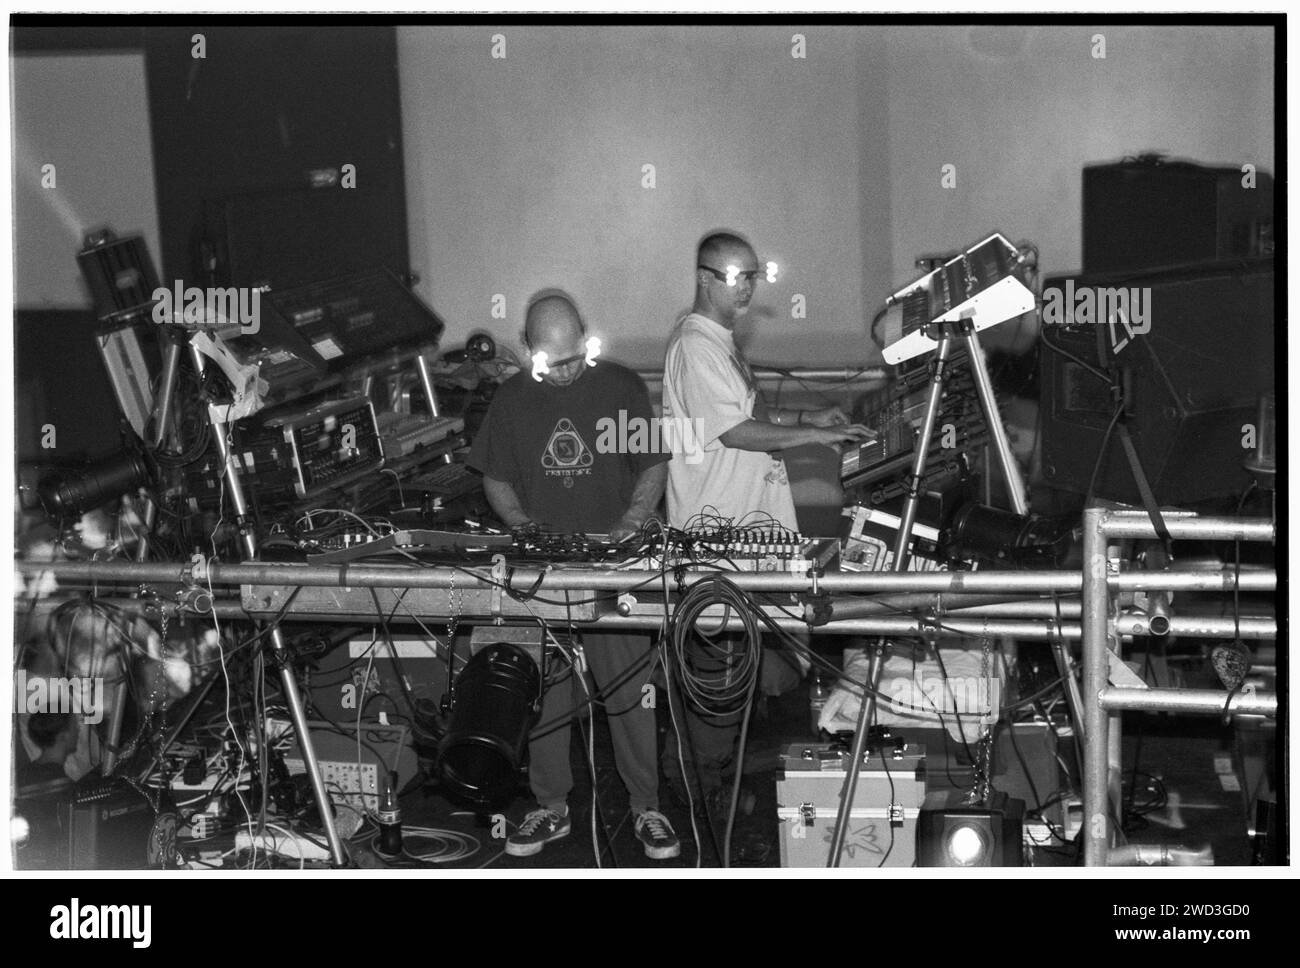 Dance music legends Orbital on their scaffold centre stage with light glasses  on the Megadog Tour at Cardiff University in Cardiff, Wales, UK on 4 October, 1993. Photo: Rob Watkins. INFO: Orbital, a pioneering electronic music duo from England formed in 1989, played a crucial role in the development of ambient and techno genres. Brothers Paul and Phil Hartnoll created innovative, atmospheric, and danceable tracks that have left a lasting impact on electronic music. Stock Photo